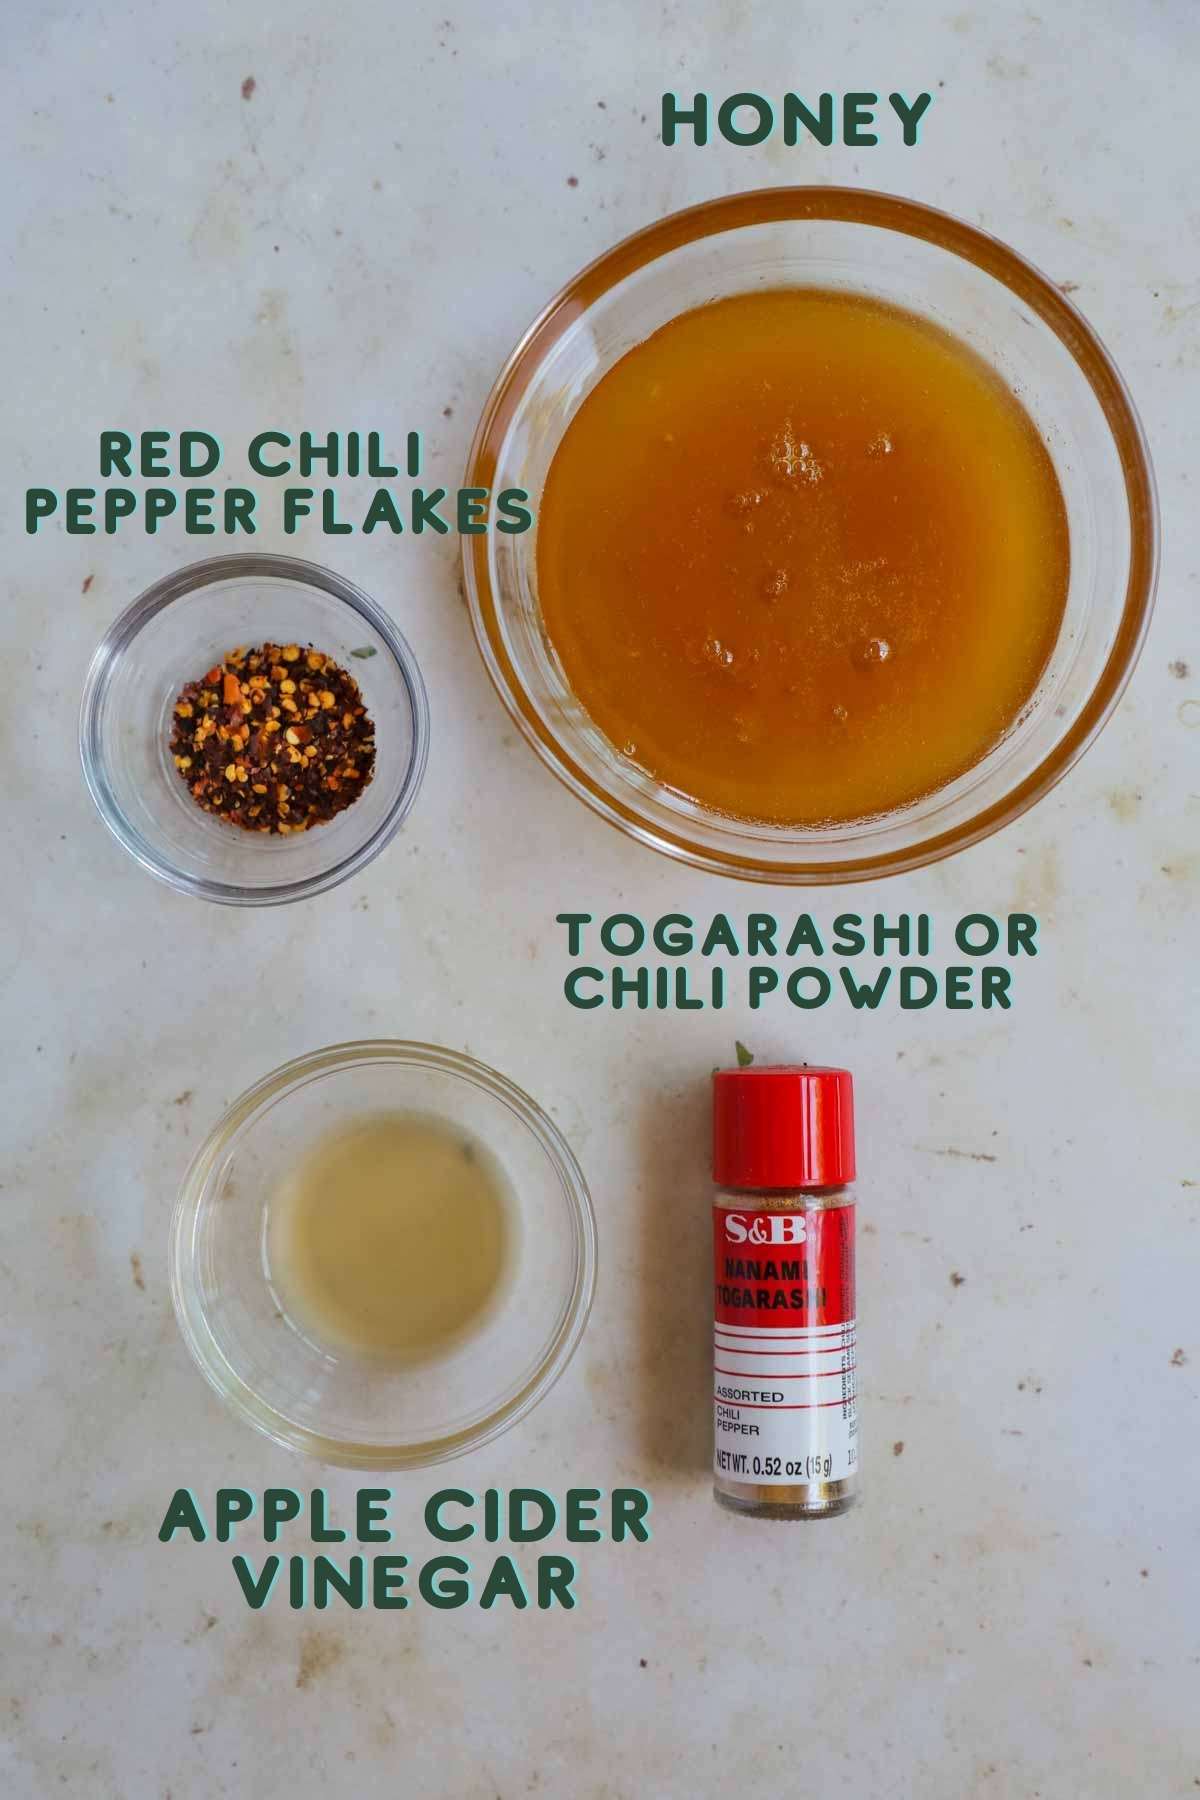 Ingredients for hot honey sauce, including honey, red chili pepper flakes, apple cider vinegar, and togarashi or chili powder.